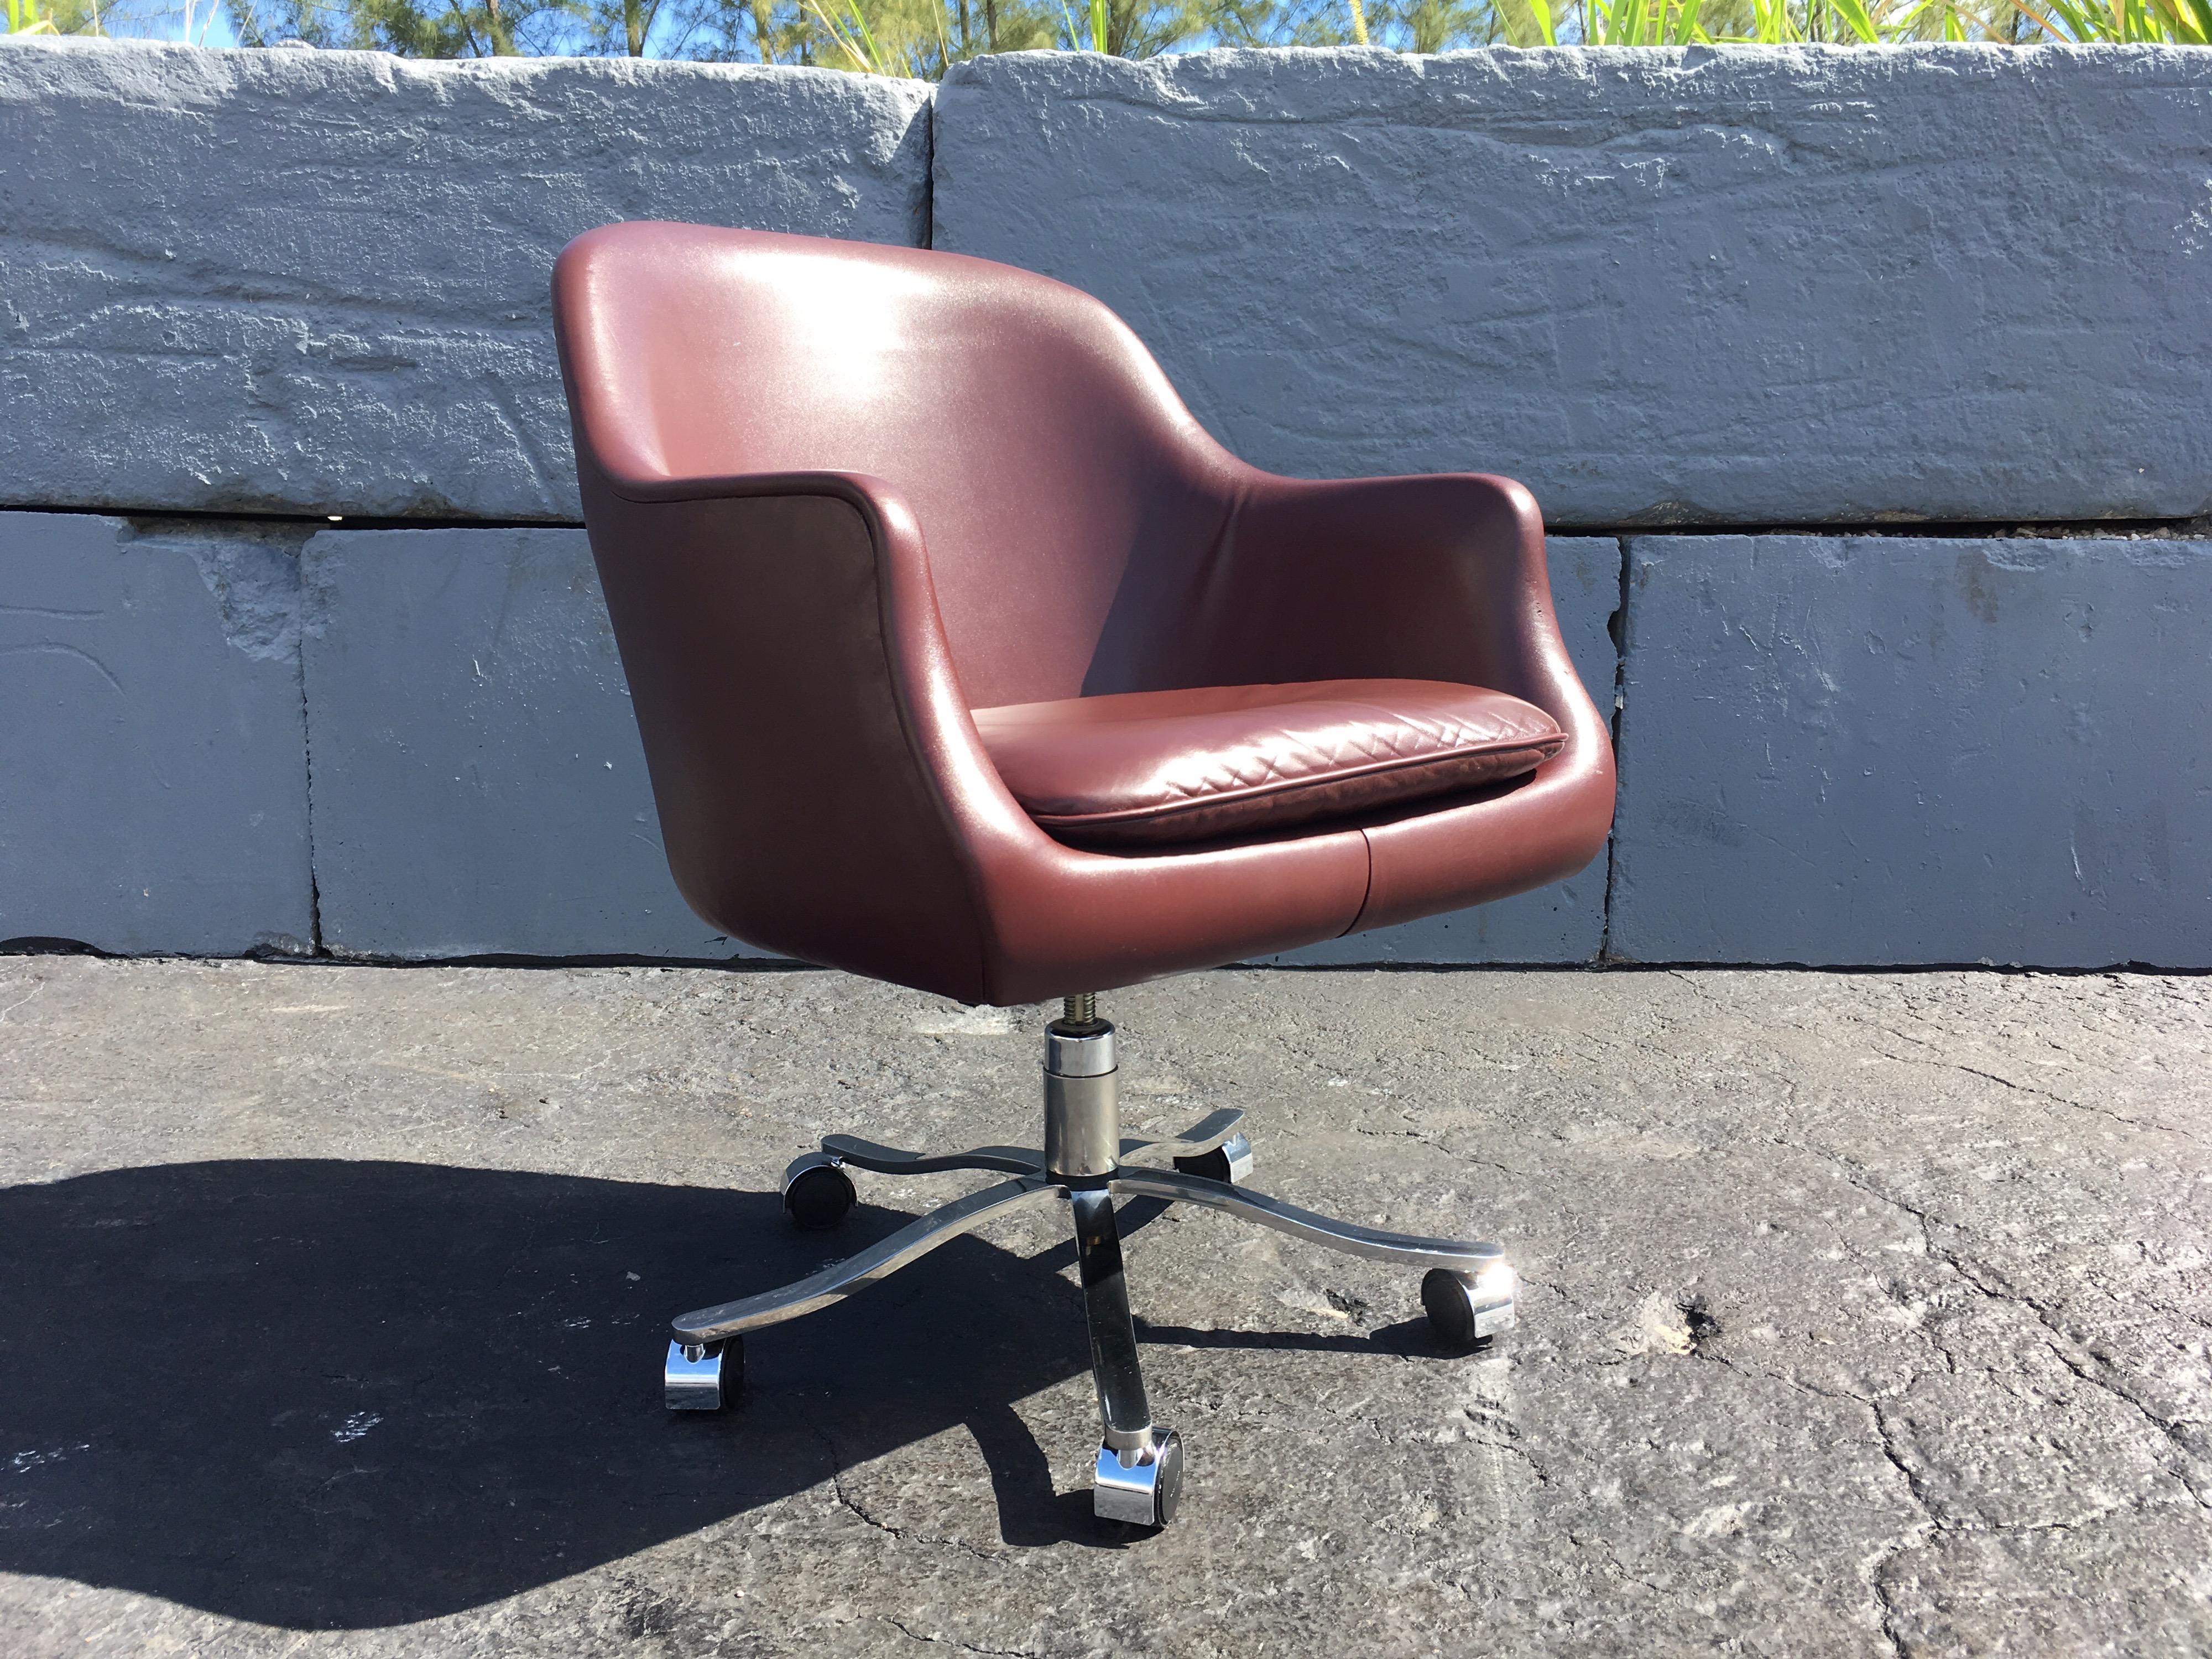 Desk chair by Nicos Zographos, leather, stainless steel base, tilts, swivels, adjustable seat height is 21.50”-17.50”.